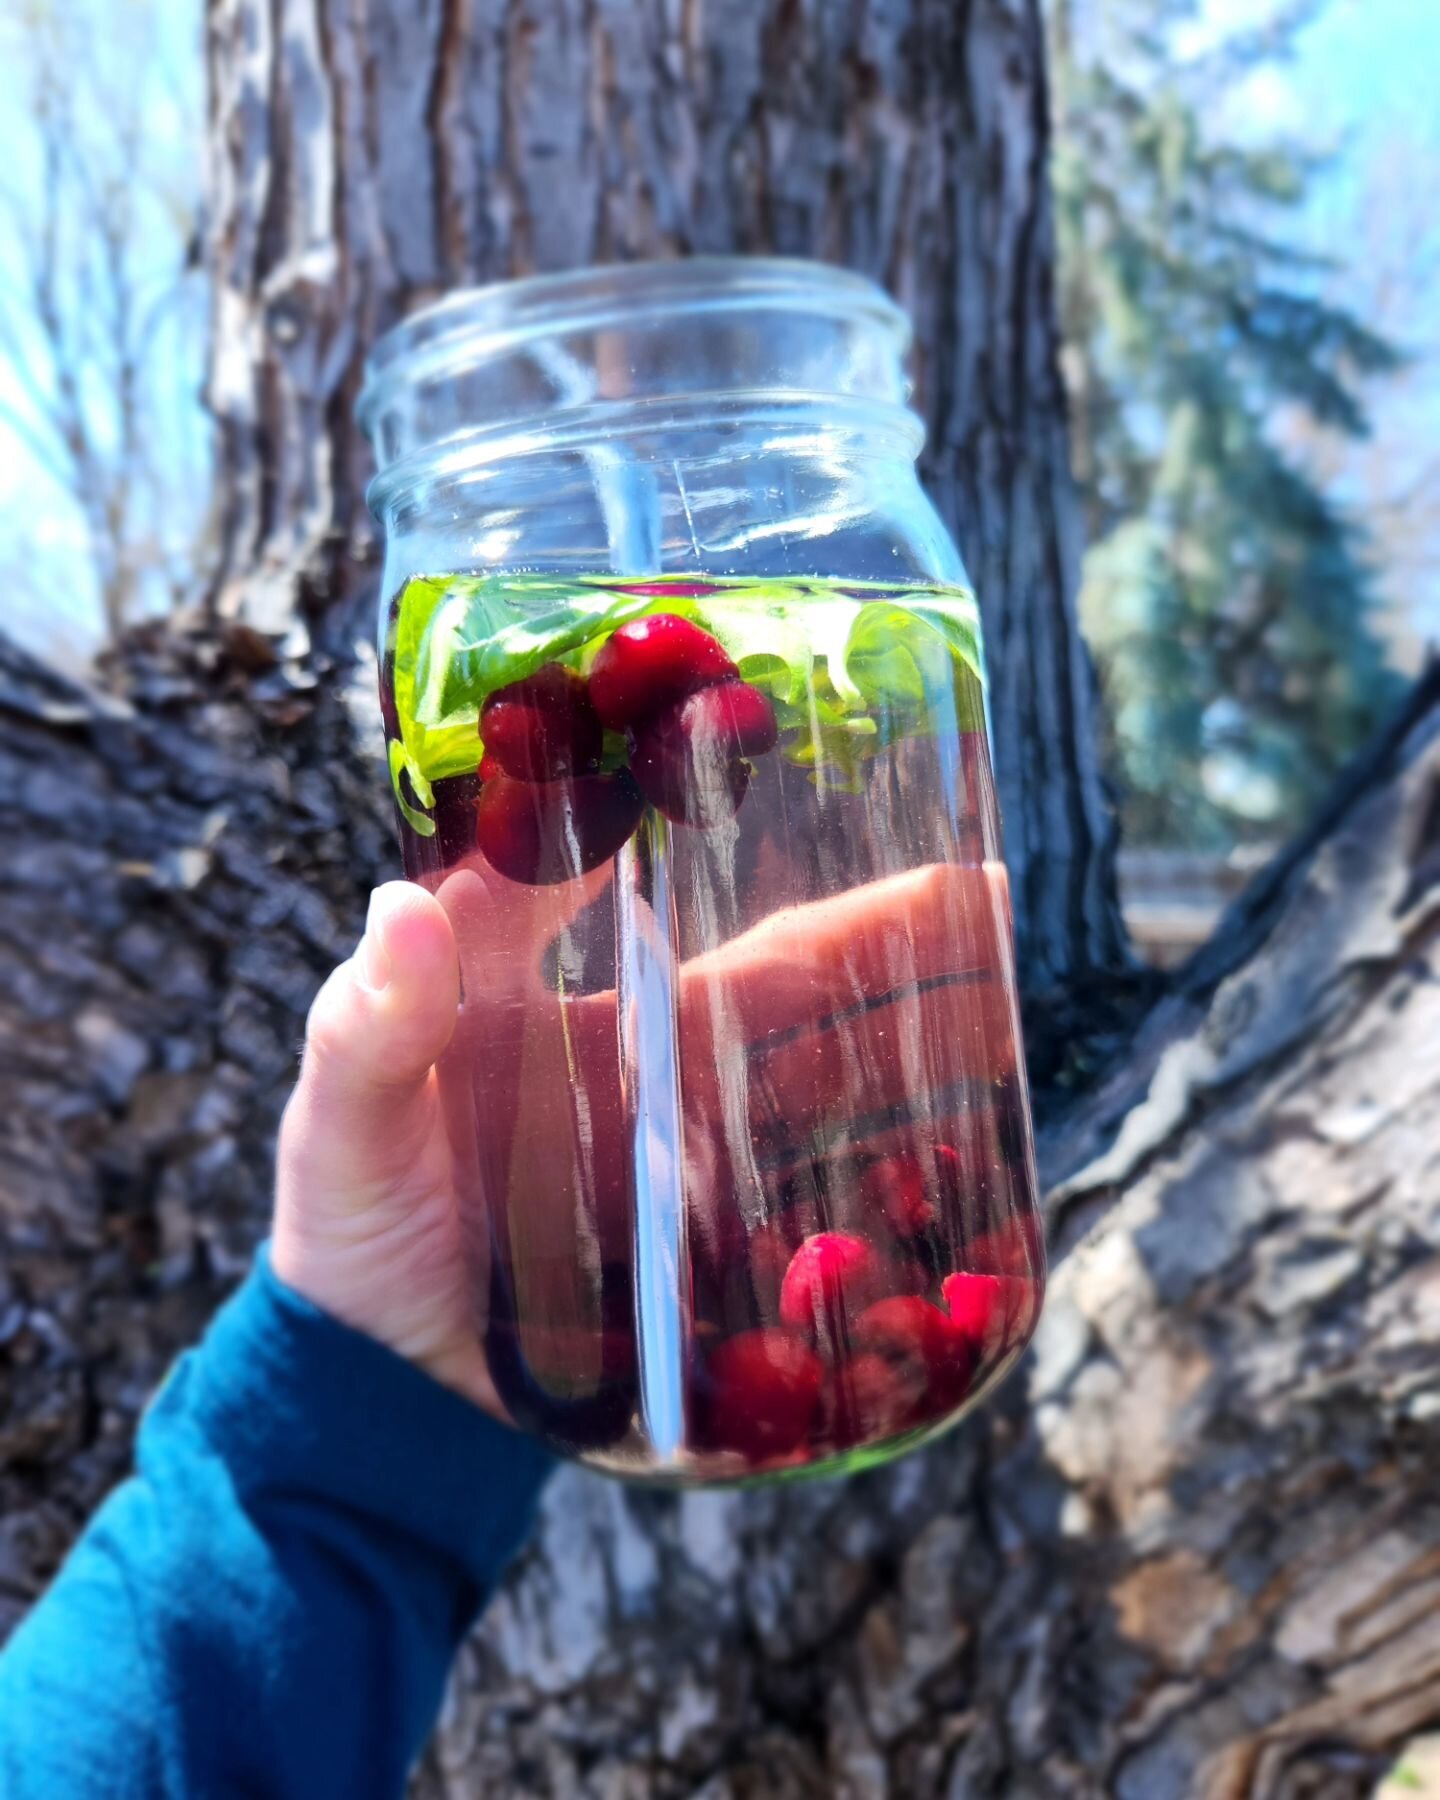 Bringing back hydration infusions!!! 🌱🍒

🌞
.
I know often plain water can tend to get a tad boring! So bringing back the favorite hydration infusions!! 

Lets make some herbal/veggie infusions to help inspire you to drink up!
.
.
Deets://
Filtered